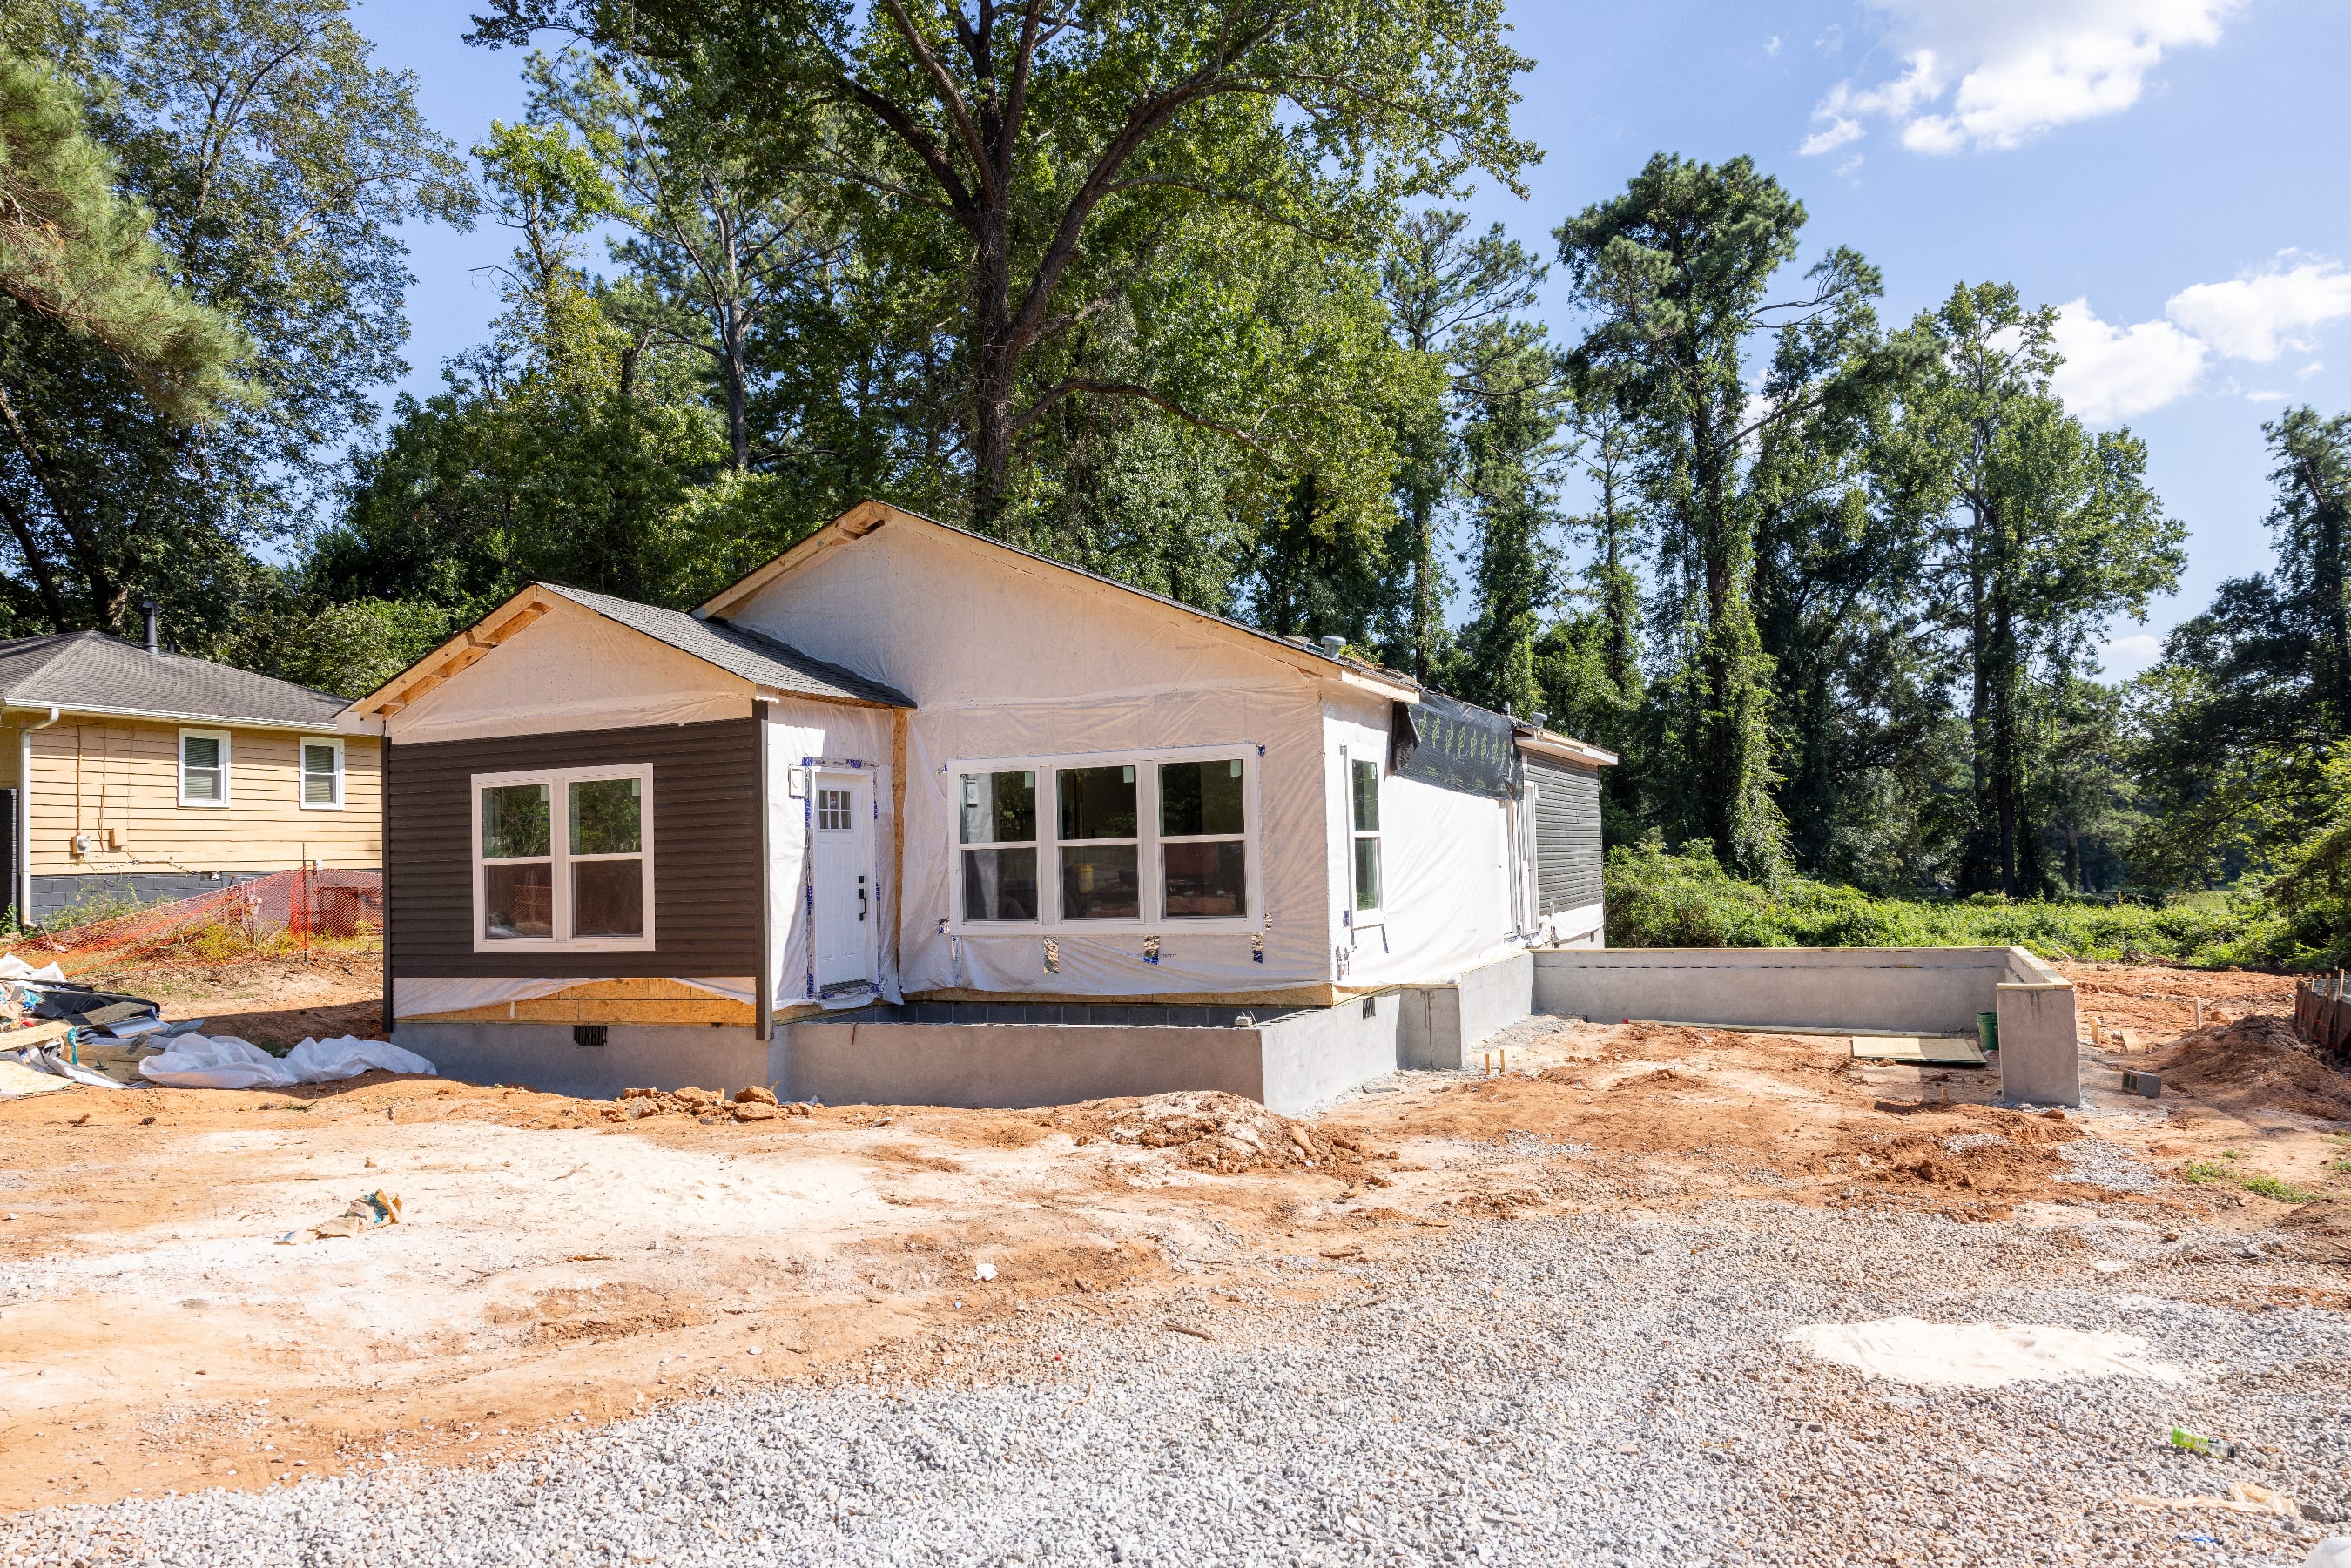 CrossMod homes are built to HUD code and blend the best of off-site and site-built construction. Once on-site, elements like the porch and garage are built.